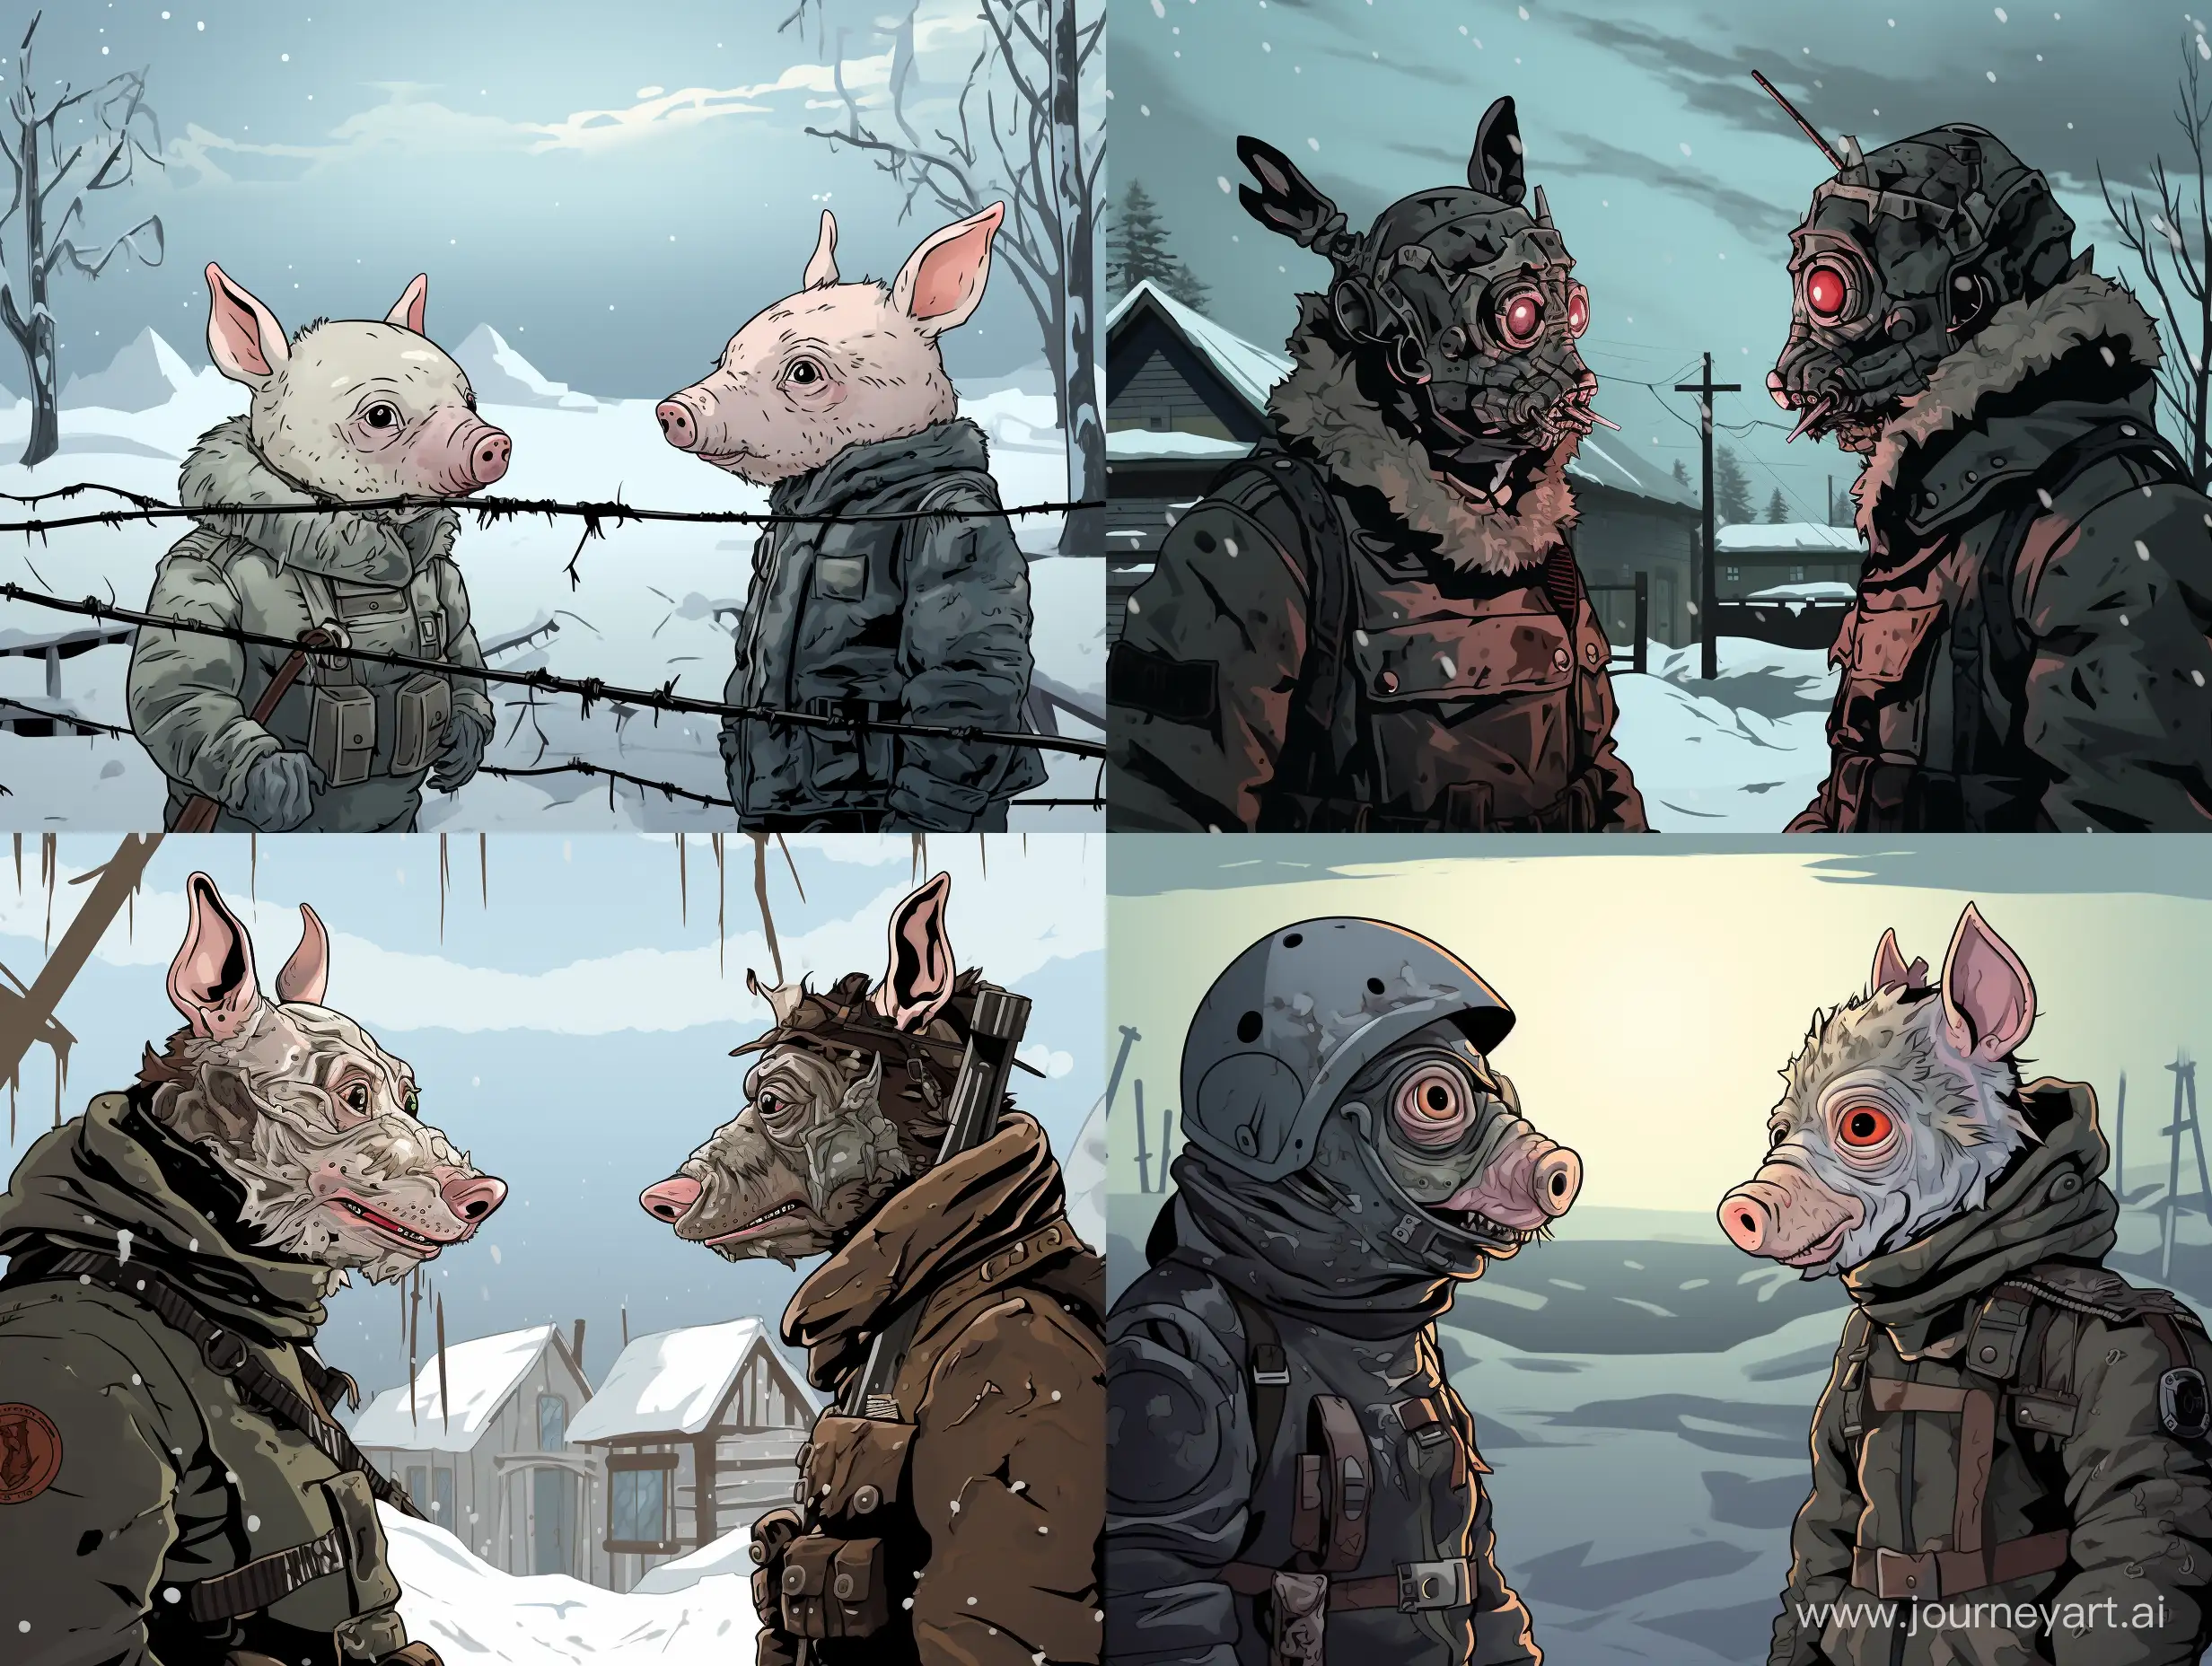 Two frozen piglets are talking to each other, Cartoon characters, military uniform and a bullet-ridden helmet, comics style, dirty snow, barbed wire, snow-covered trenches, grey sky, dark, gloomy in winter, big image --ar 12:9